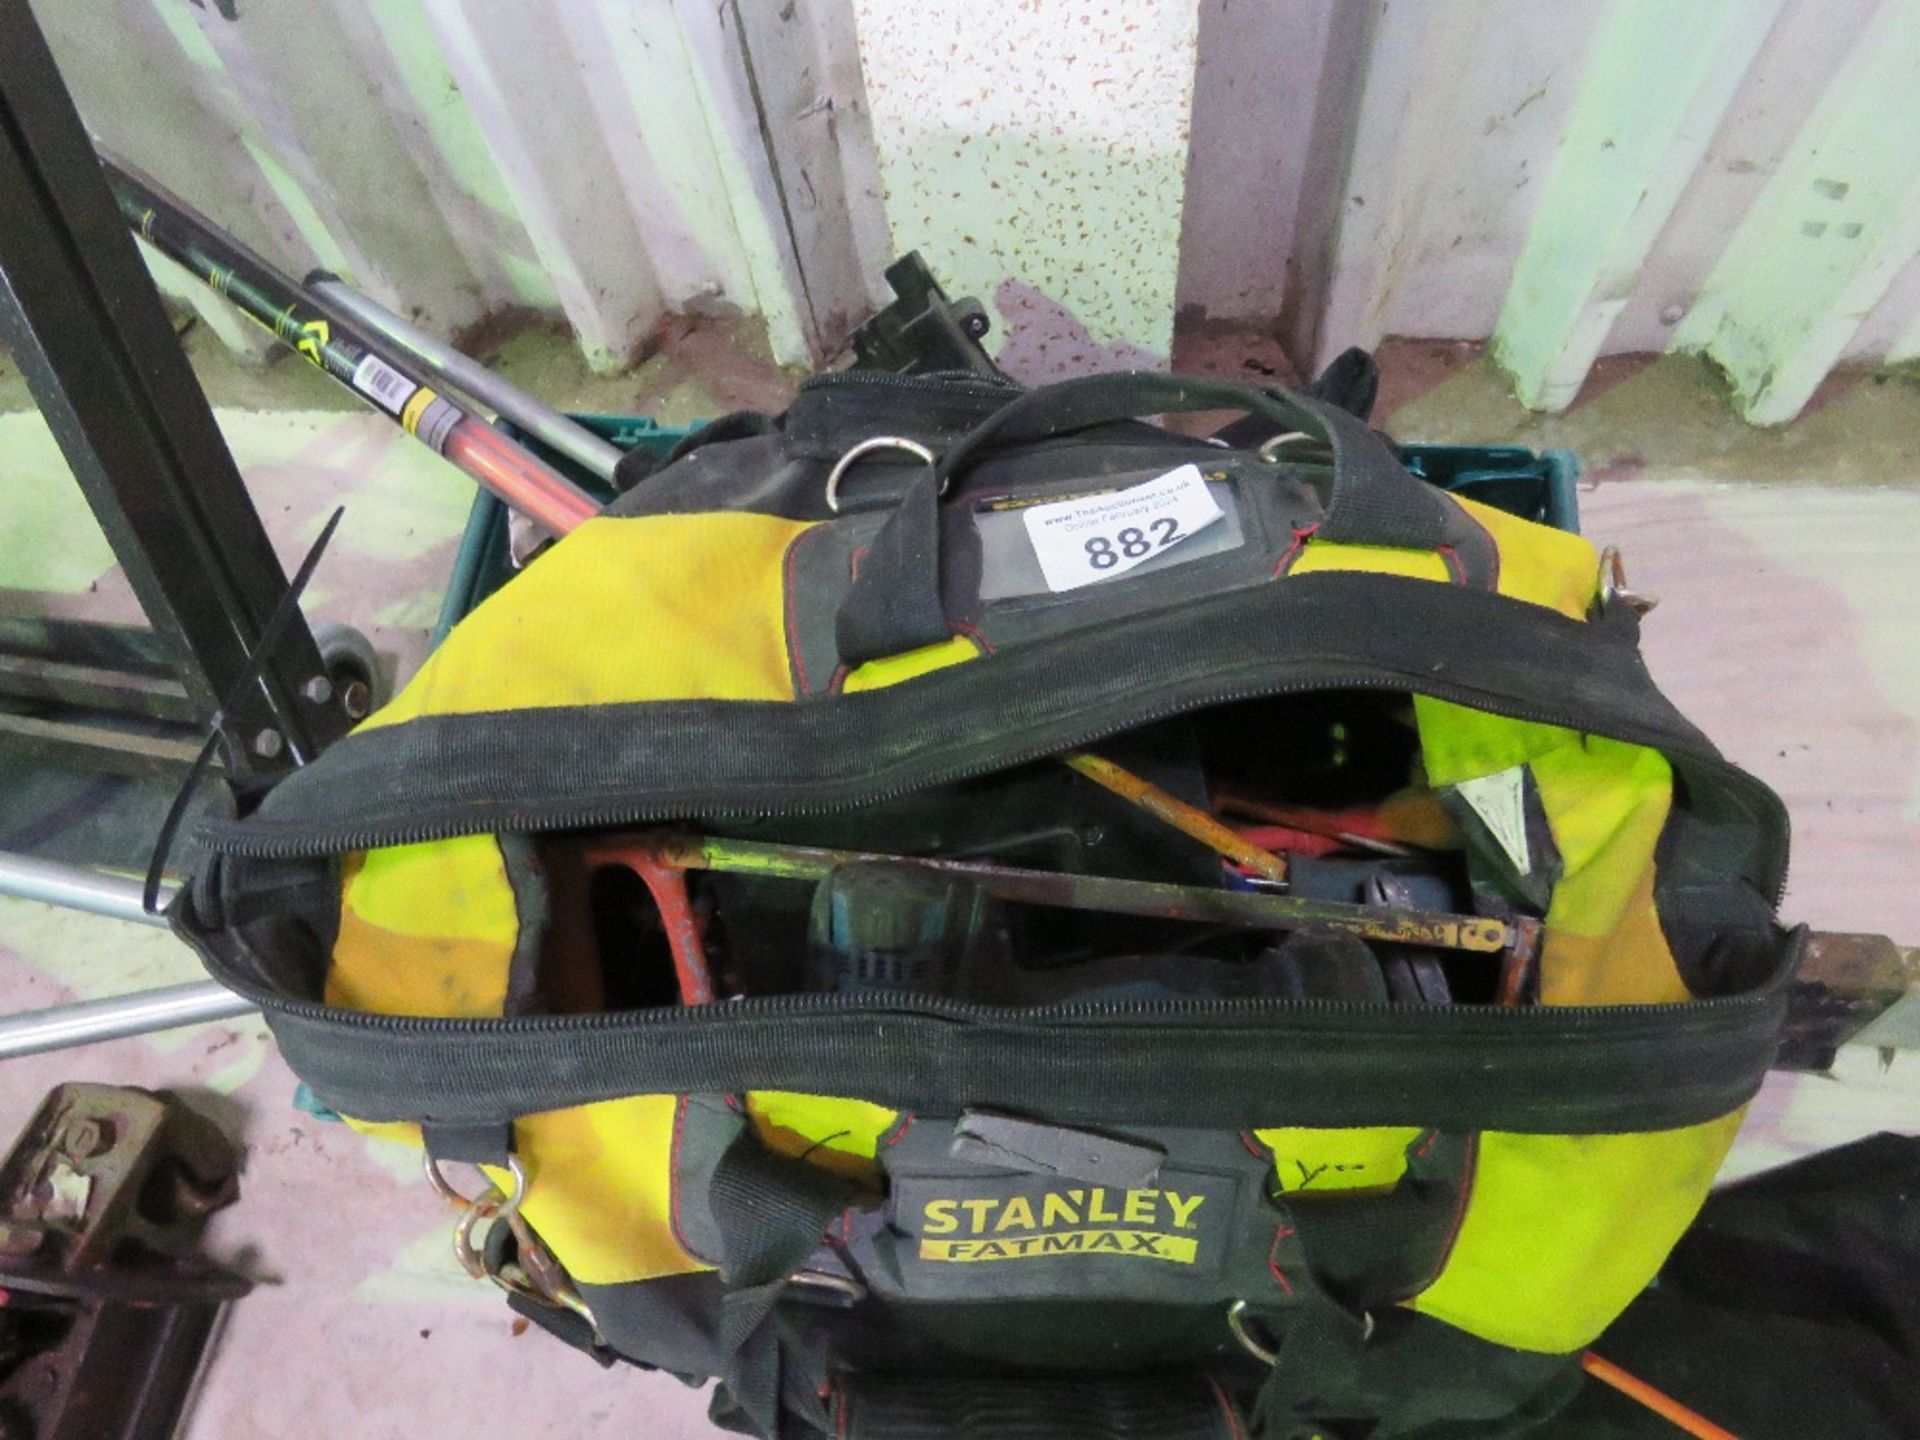 TOOL BAG CONTAINING DRILL BITS, DIE THREADING HOLDERS, ELECTRICIANS CABLE RODS ETC. SOURCED FROM COM